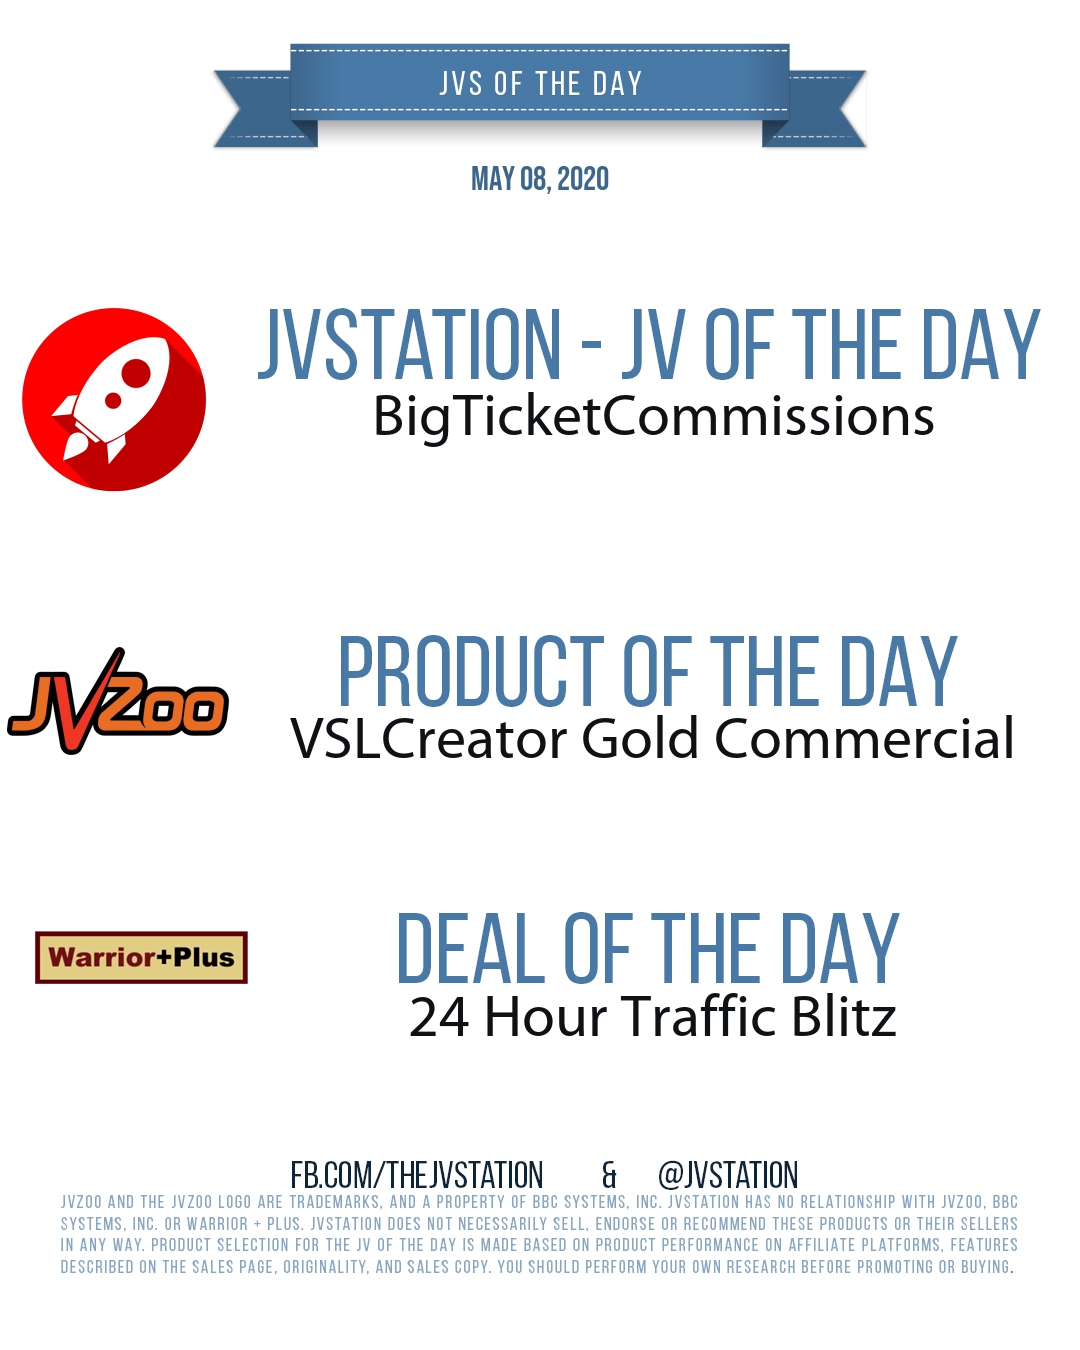 JVs of the day - May 08, 2020